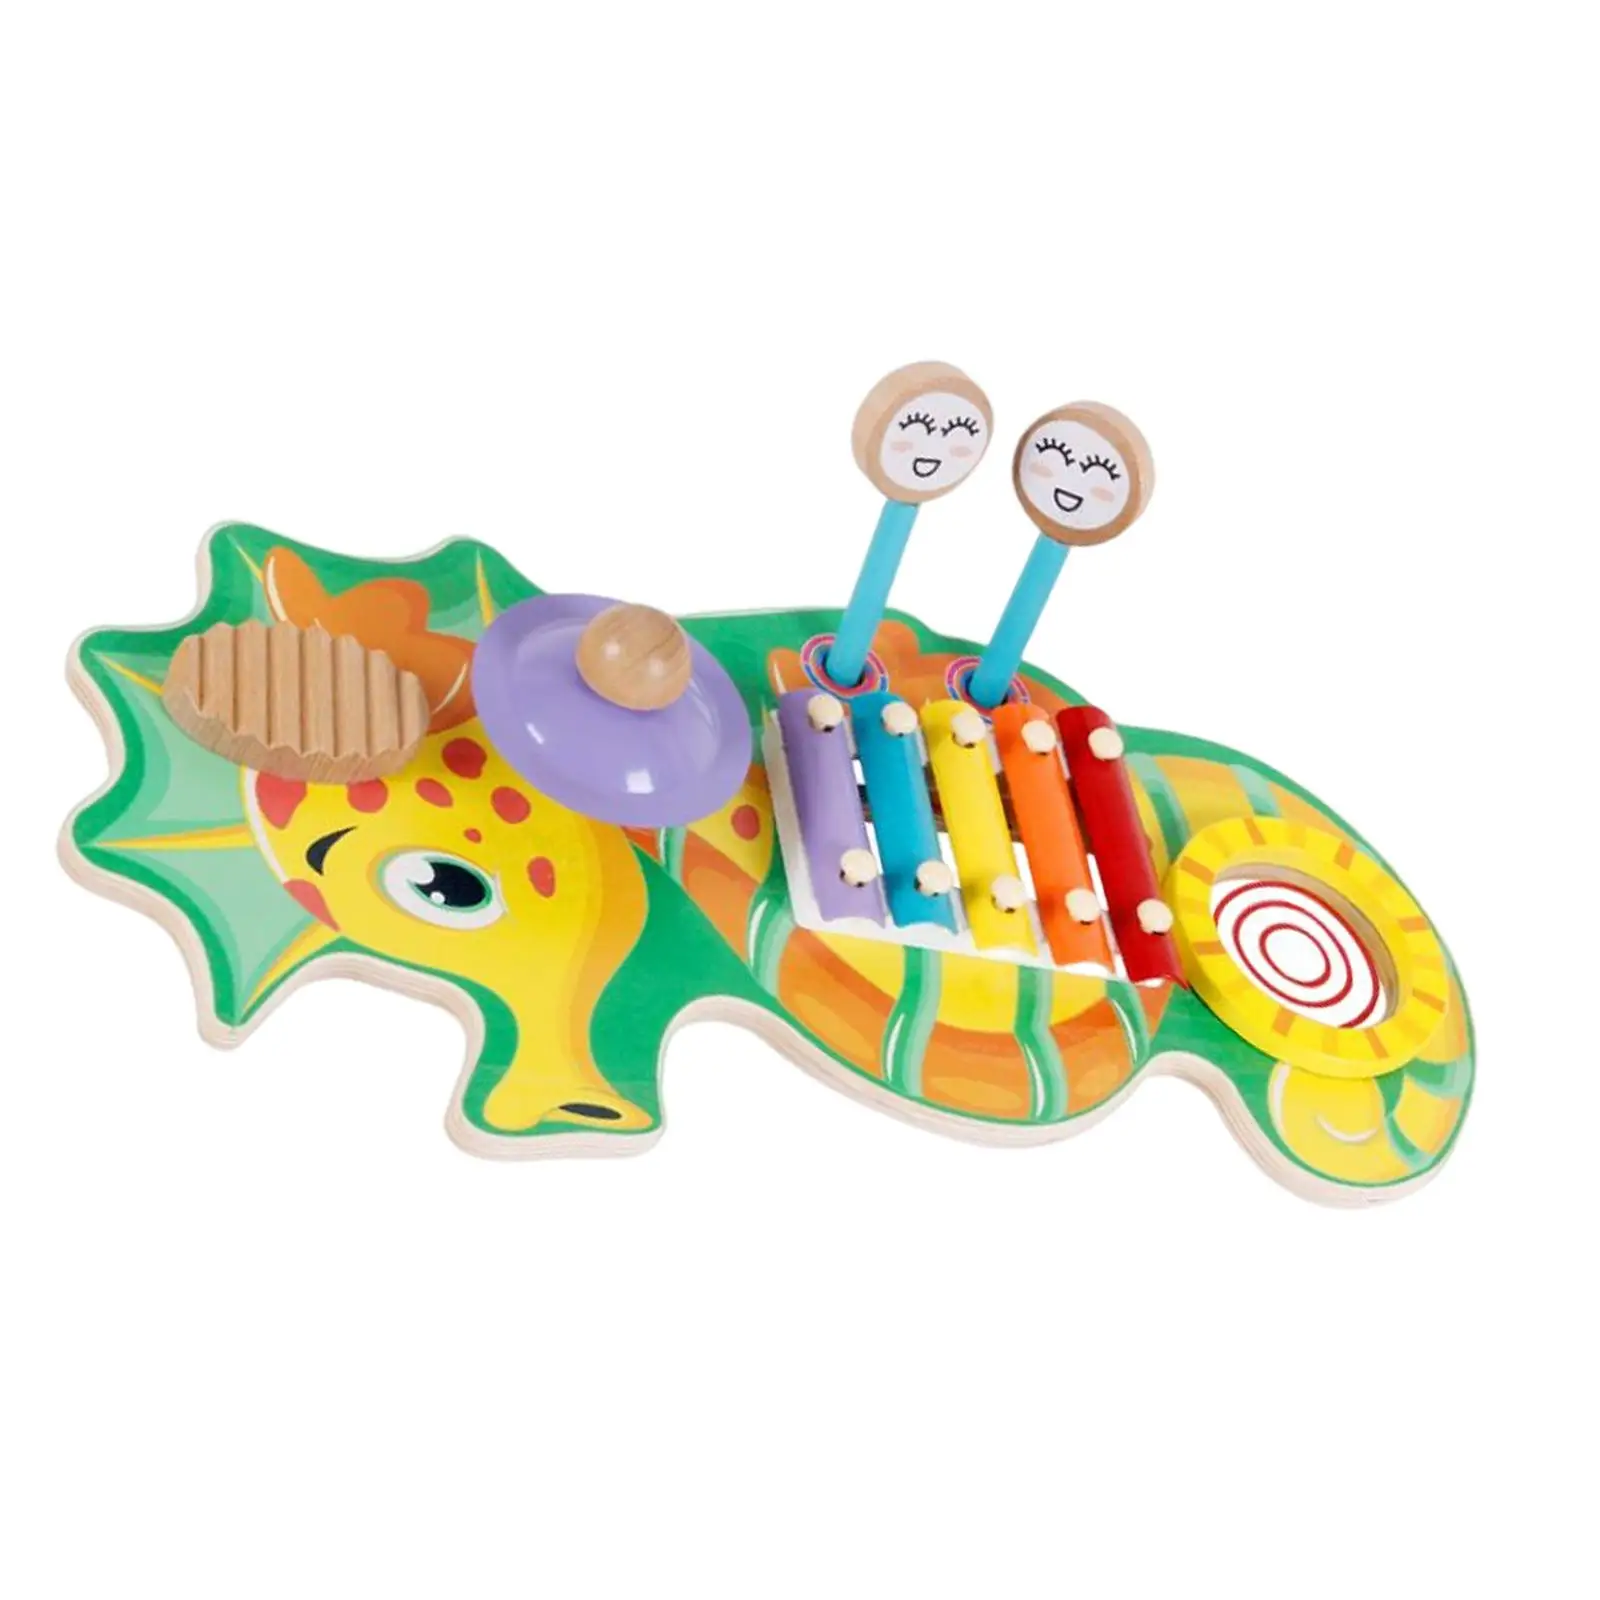 Percussion Instrument Toy Fine Motor Skills Sensory Toy for Bedroom Toddler